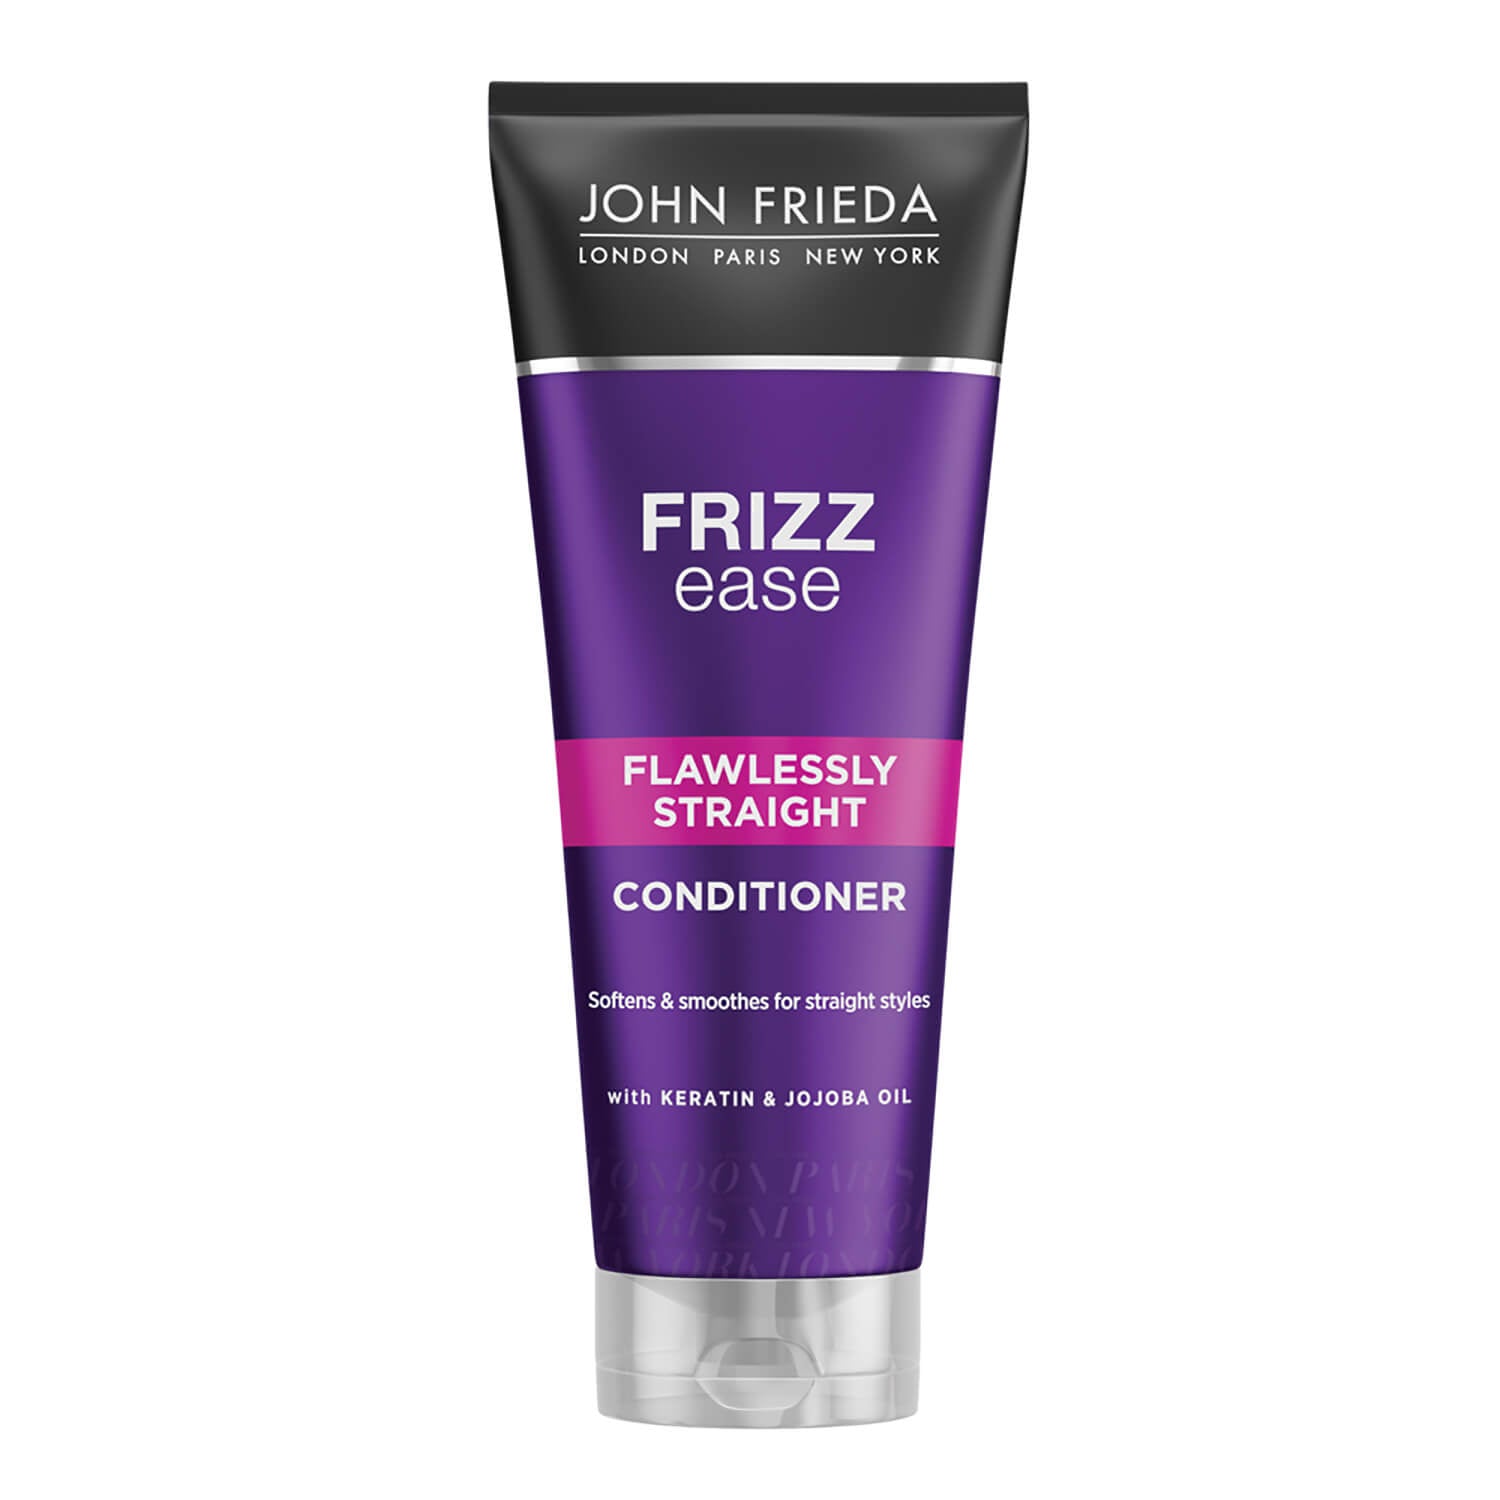 John Frieda Frizz Ease Flawlessly Straight Conditioner 1 Shaws Department Stores